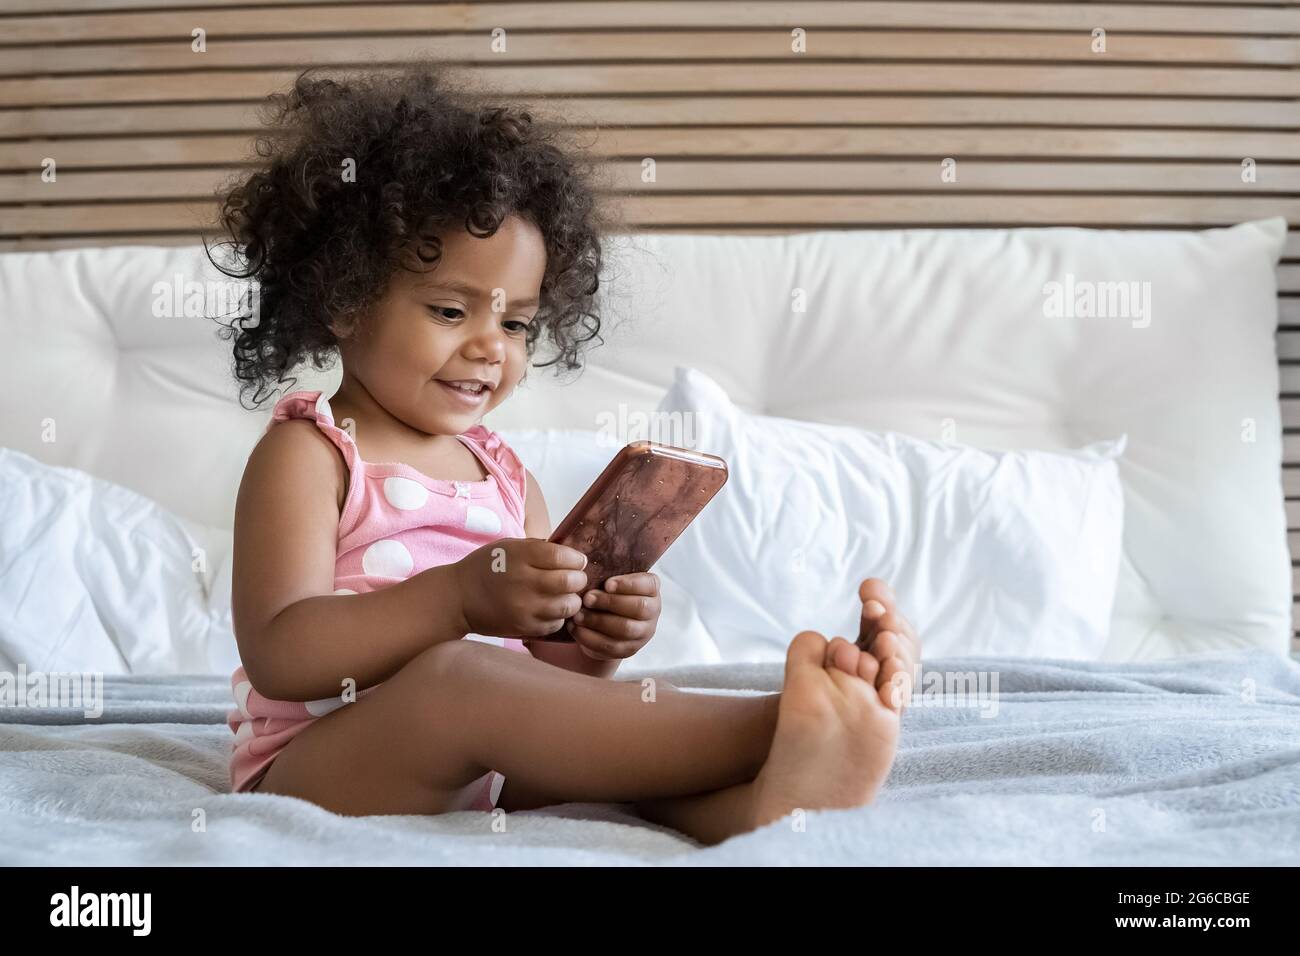 Cute barefoot african american girl little hild playing with mobile phone Stock Photo